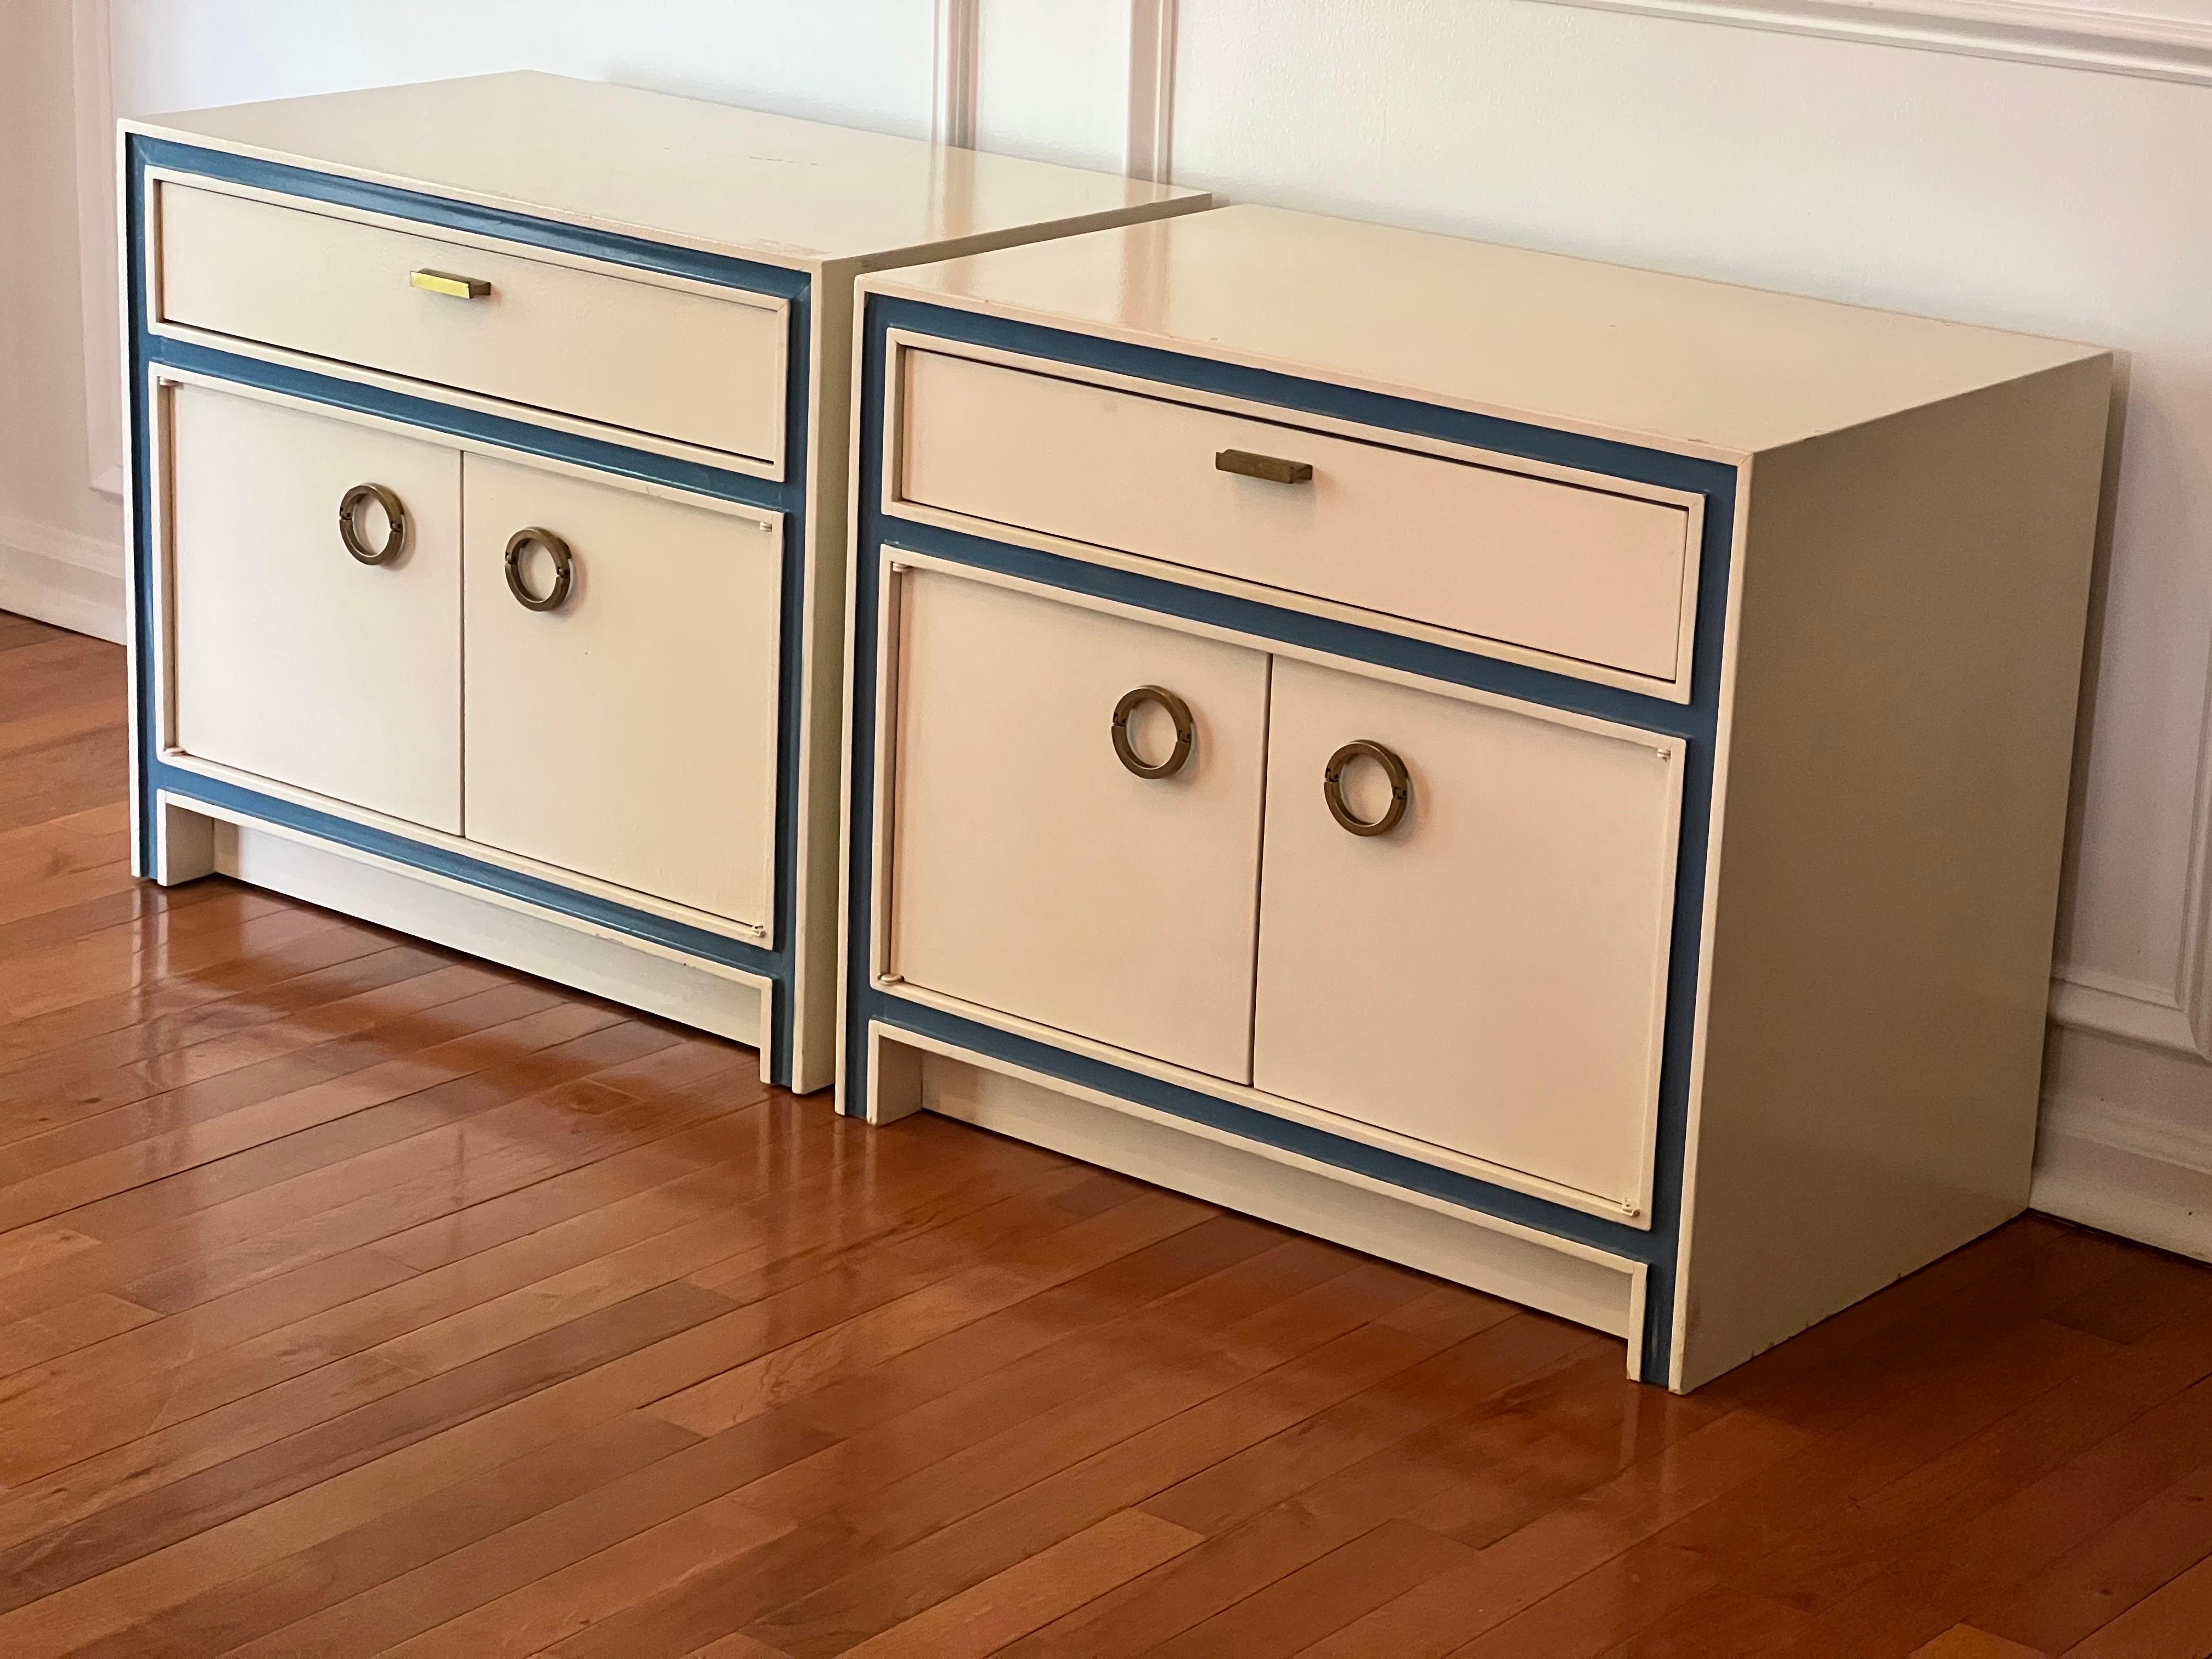 Vintage mid-century nightstands by Hickory Manufacturing Company. The pair is painted in a soothing cream color with French blue accent border highlighting the geometrical design. They each feature a single dovetail drawer and two-door cabinet with